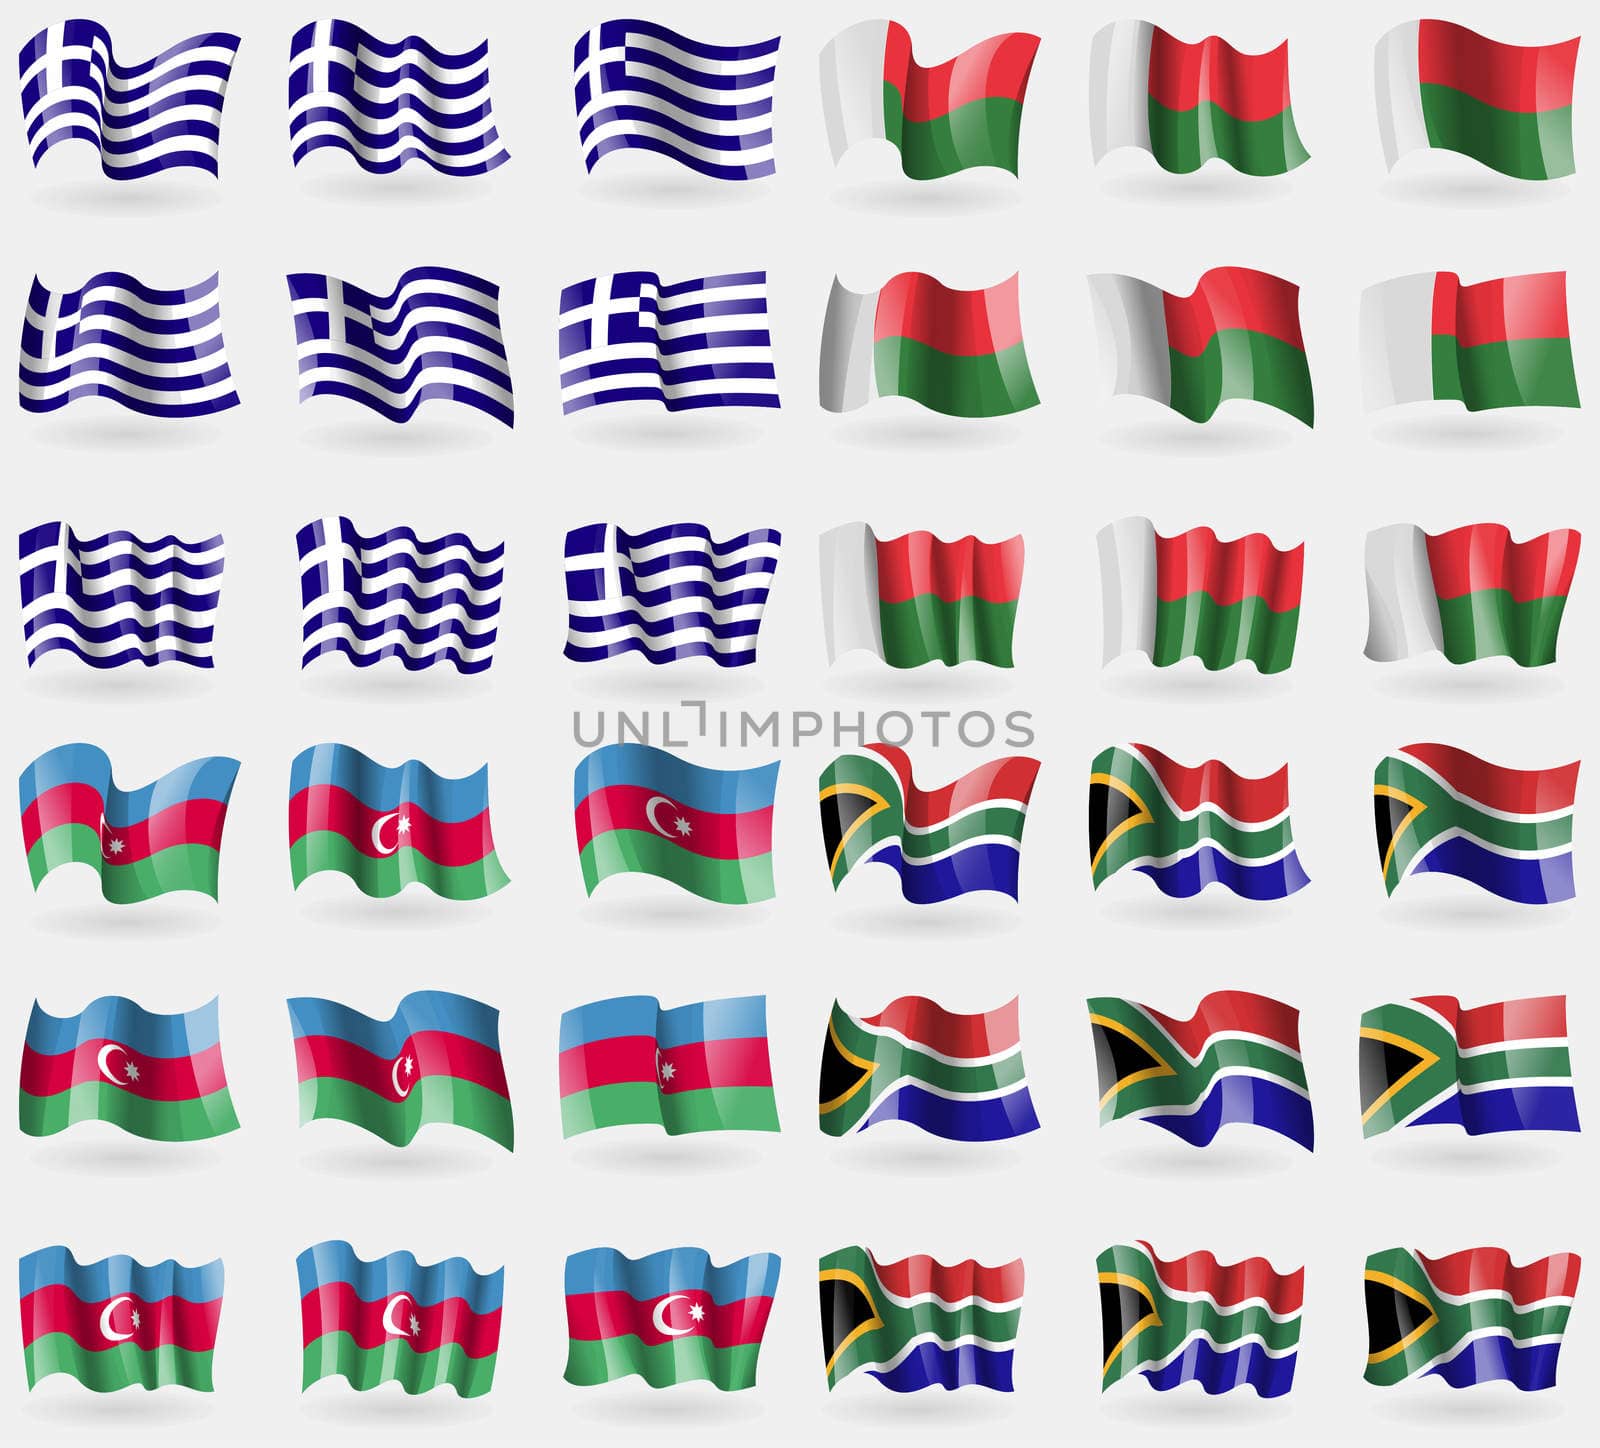 Greece, Madagascar, Azerbaijan, South Africa. Set of 36 flags of the countries of the world. illustration